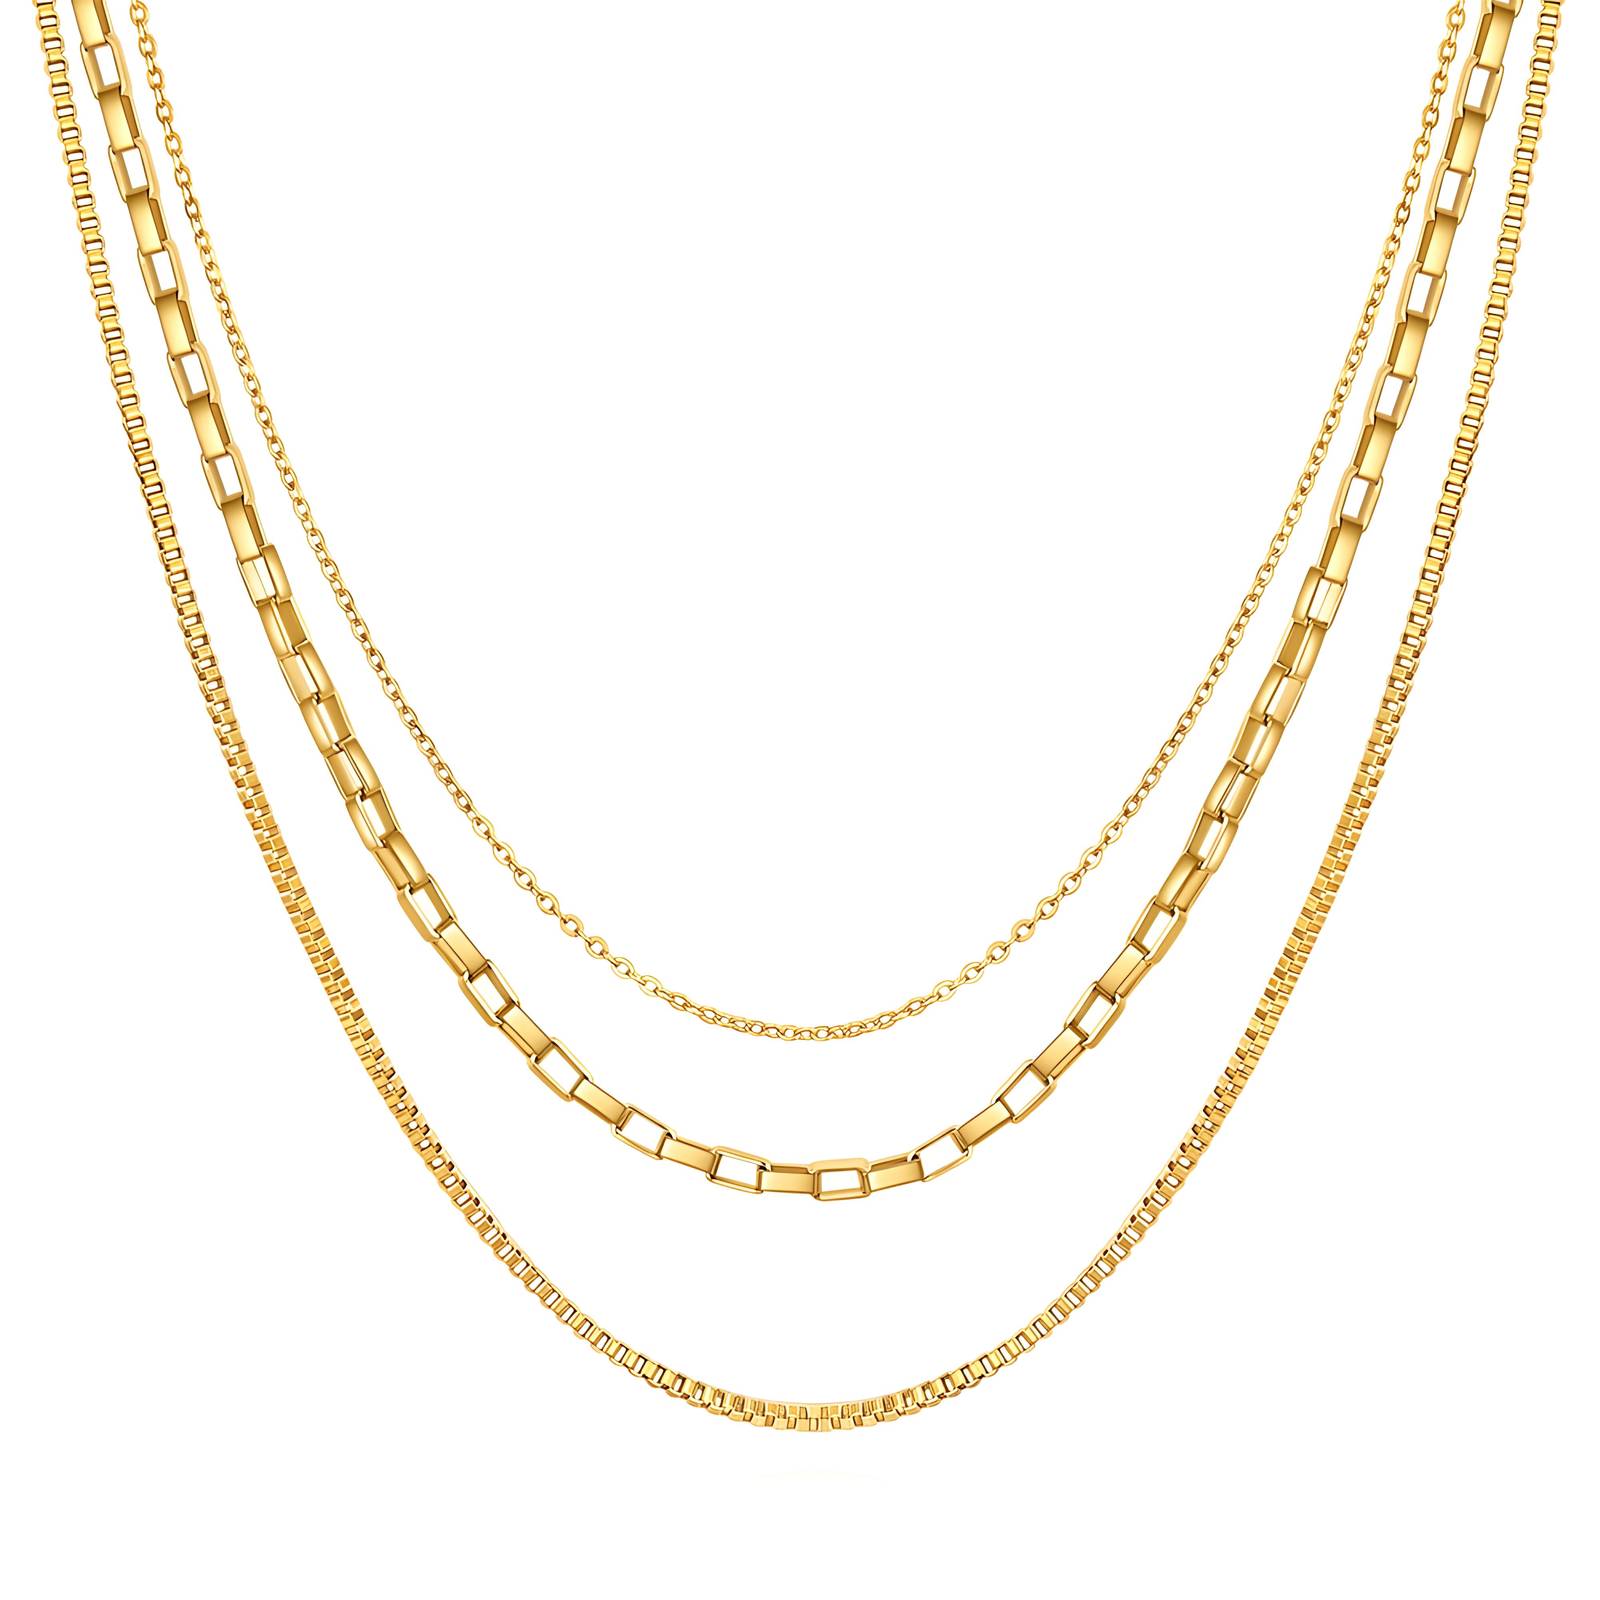 18K gold plated Stainless steel necklace, Intensity SKU #87452-0 ...